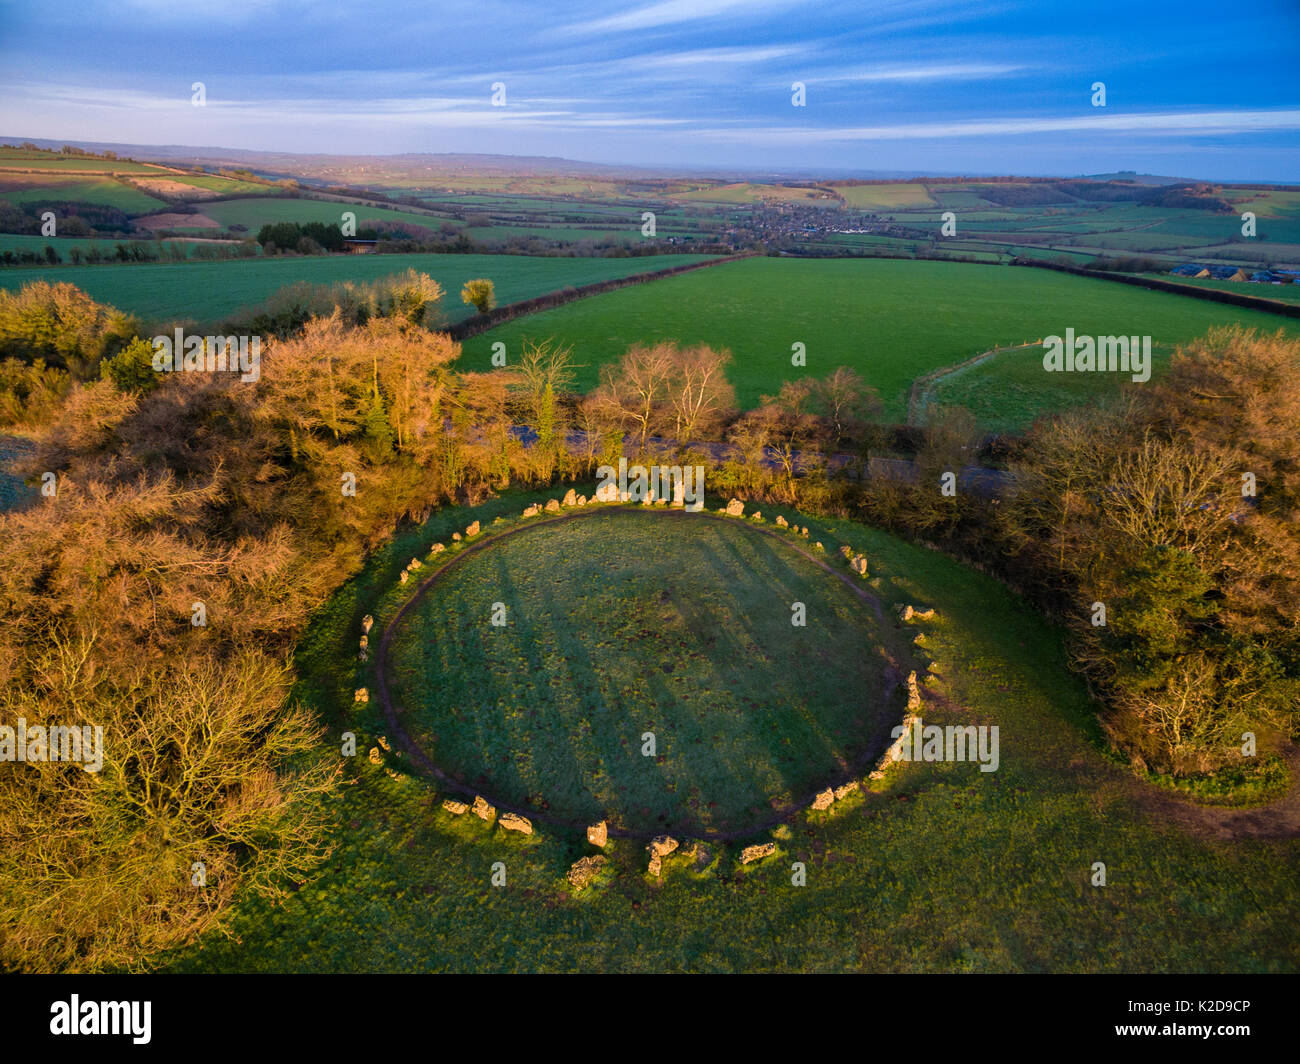 Aerial view of King's Men stone circle, part of Rollright Stones neolithic complex. Great Rollright, Oxfordshire, UK. January 2016. Stock Photo